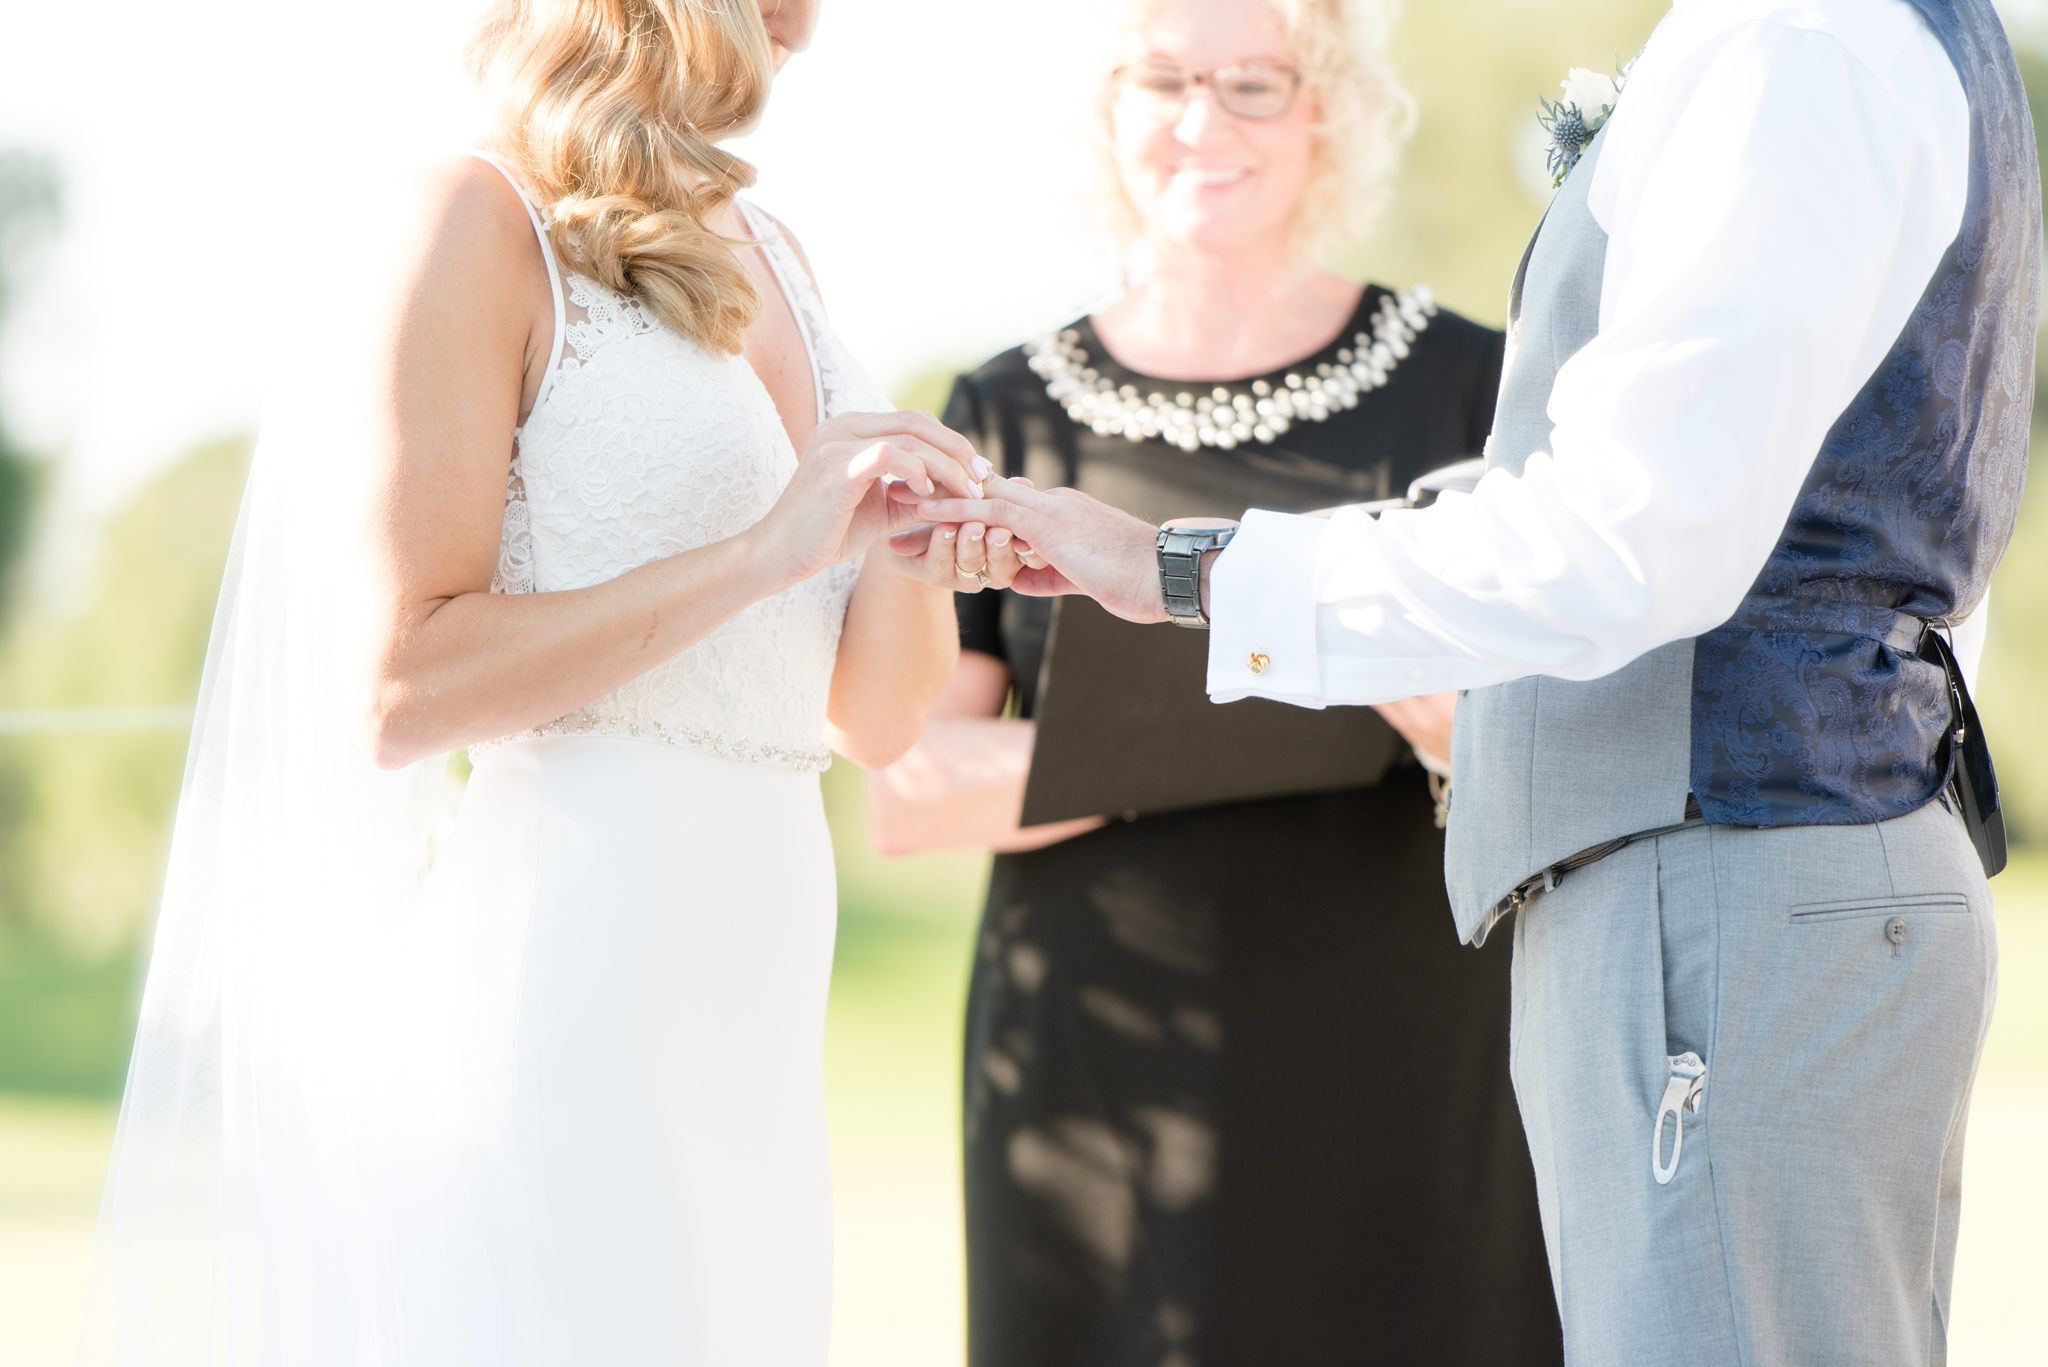 Bride places ring on groom.